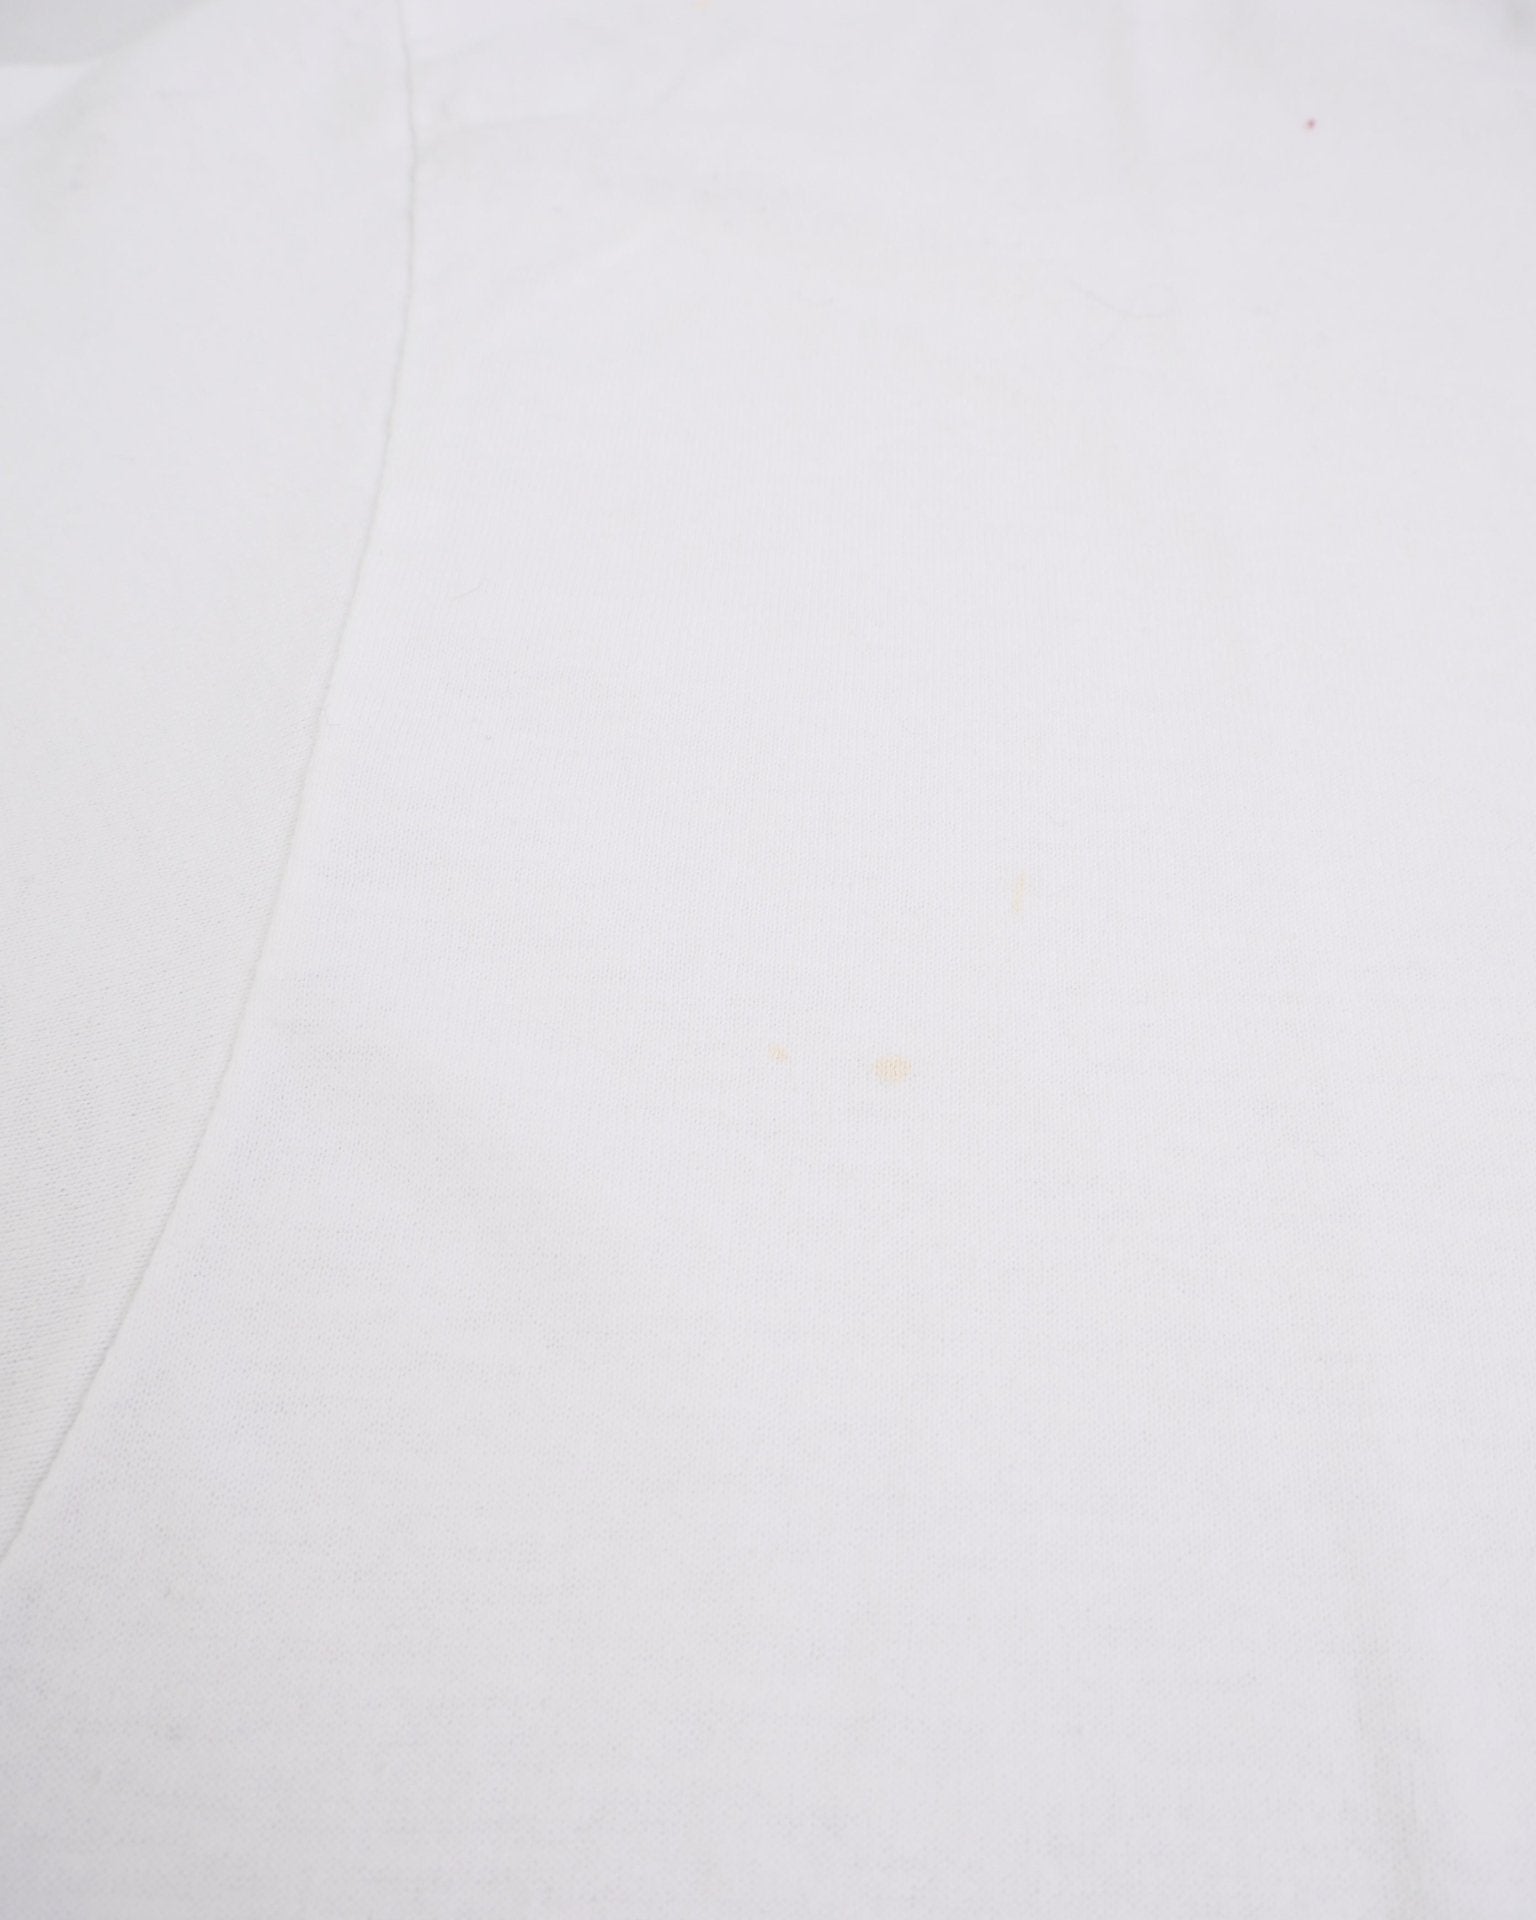 Rock & Relax printed Graphic white Shirt - Peeces